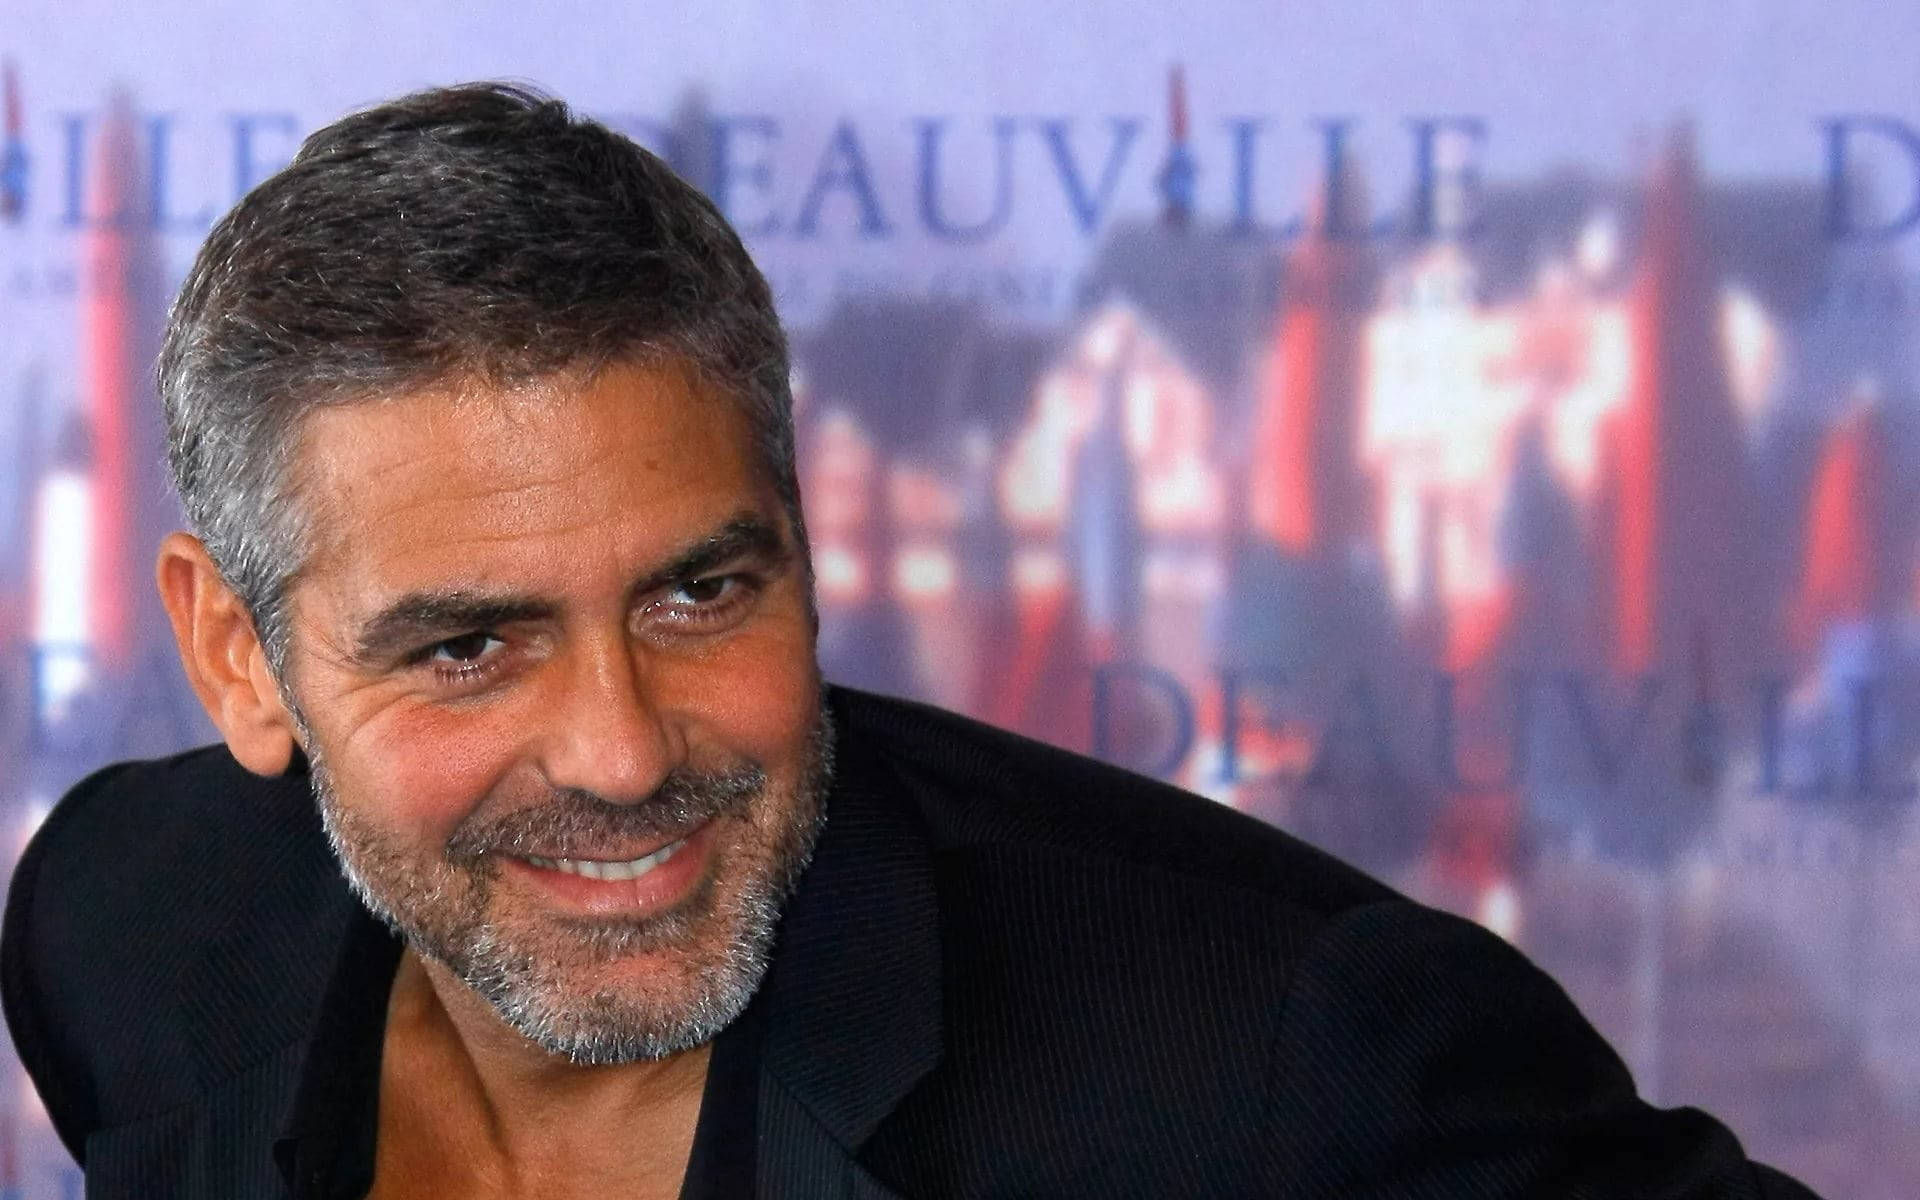 George Clooney Famous Film Actor Wallpaper